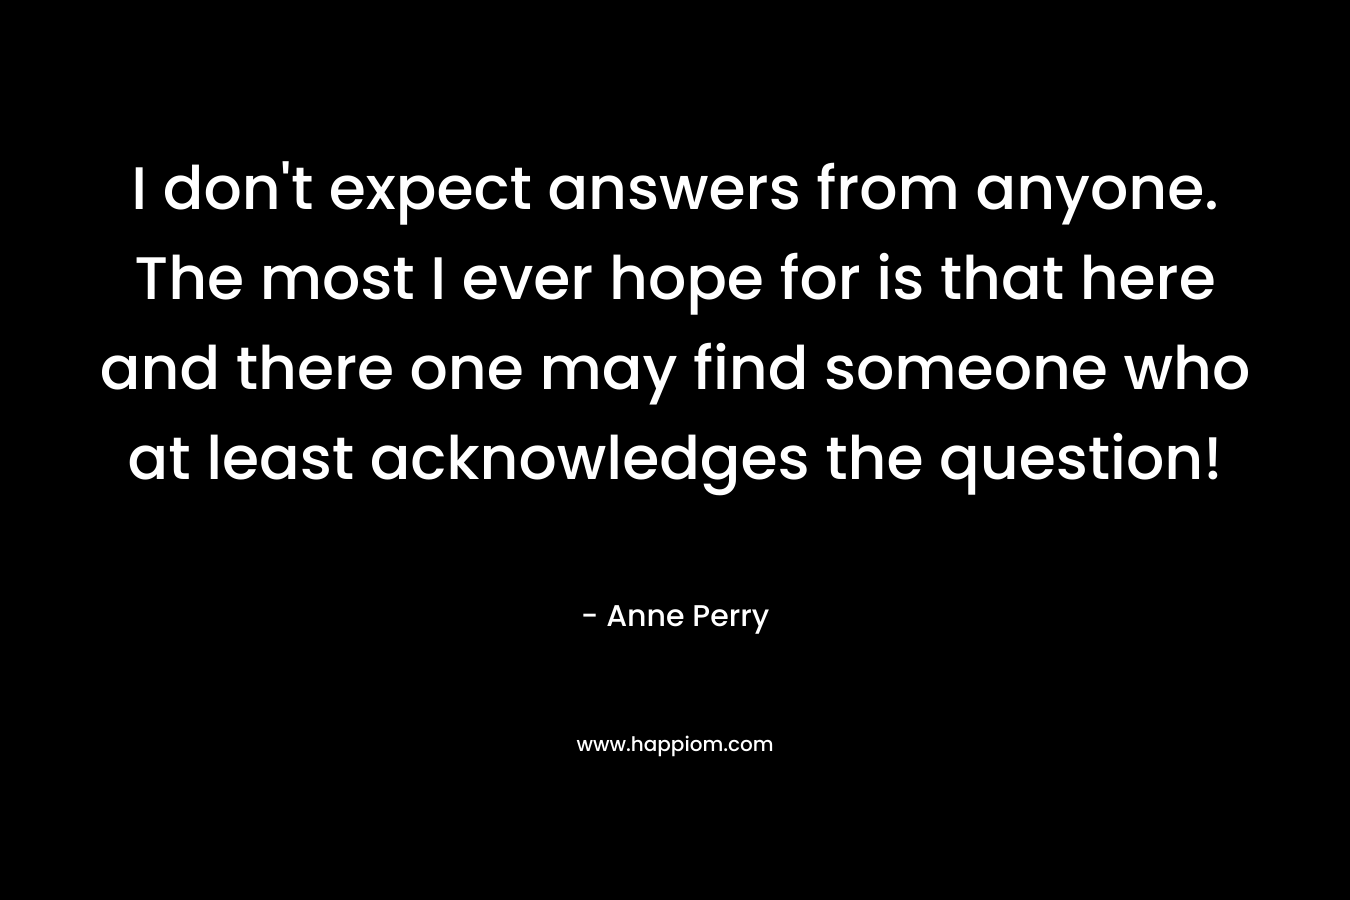 I don’t expect answers from anyone. The most I ever hope for is that here and there one may find someone who at least acknowledges the question! – Anne Perry